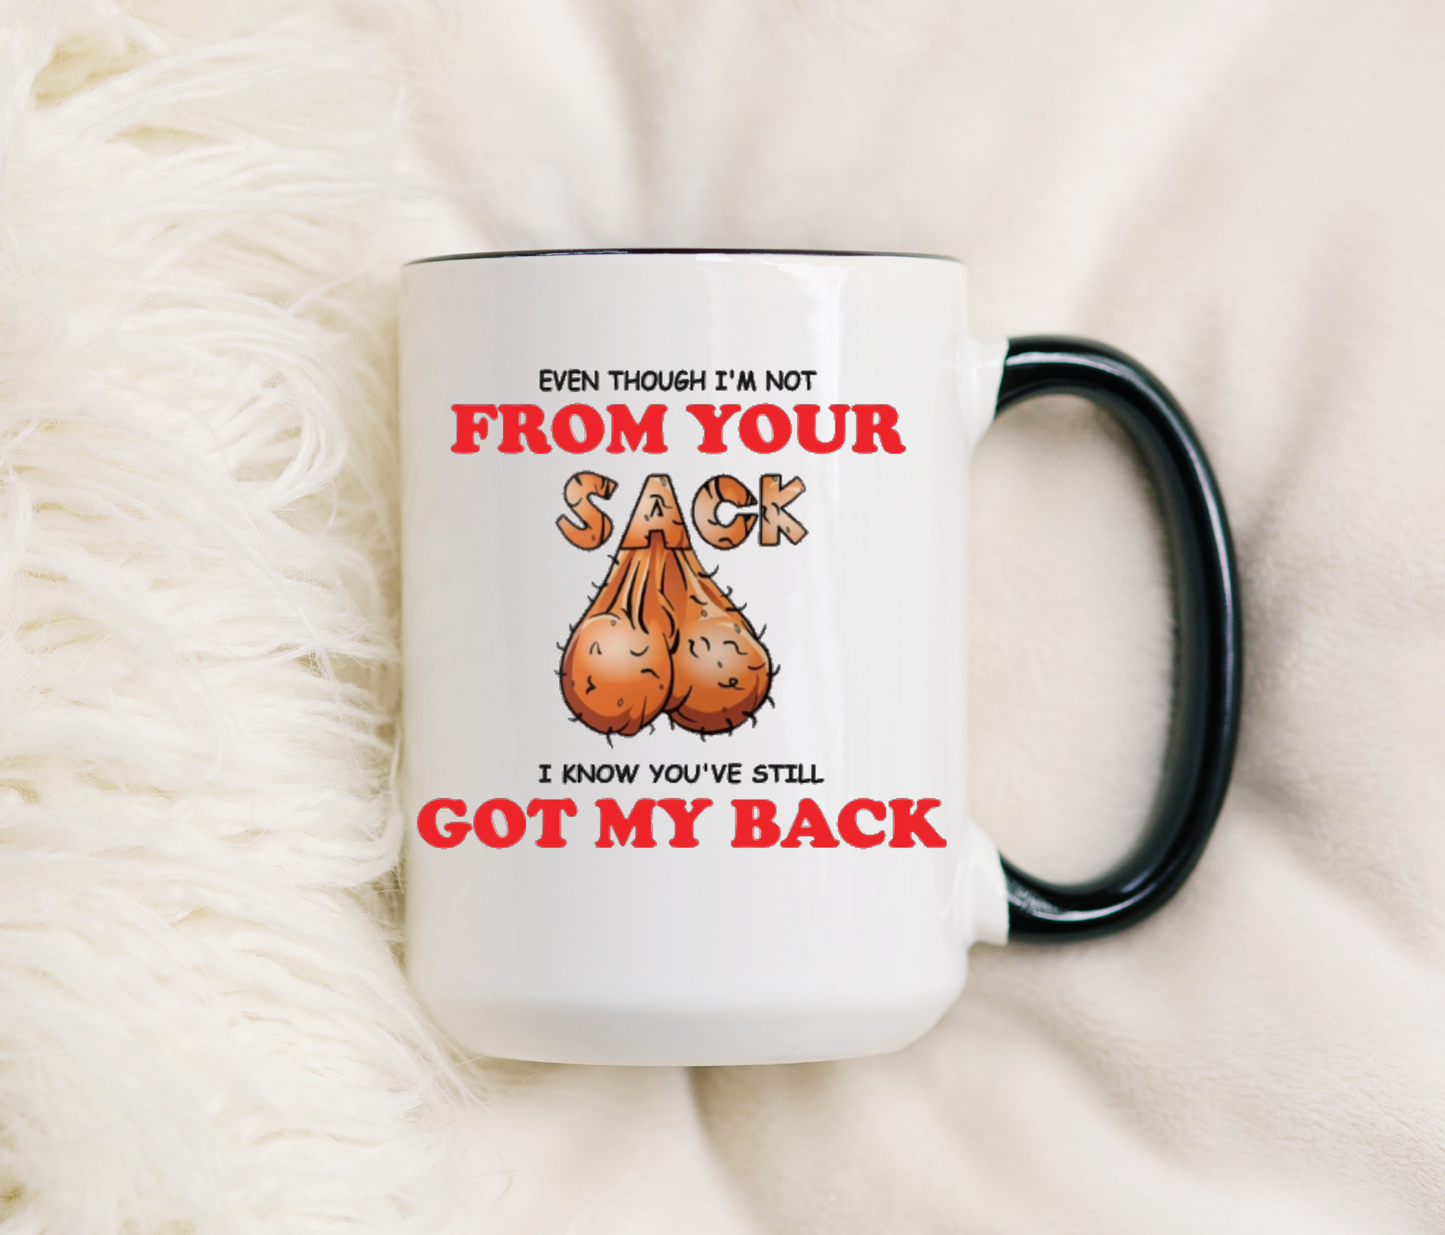 Even though I’m not from your sack you’ve got my back 15 oz Mug